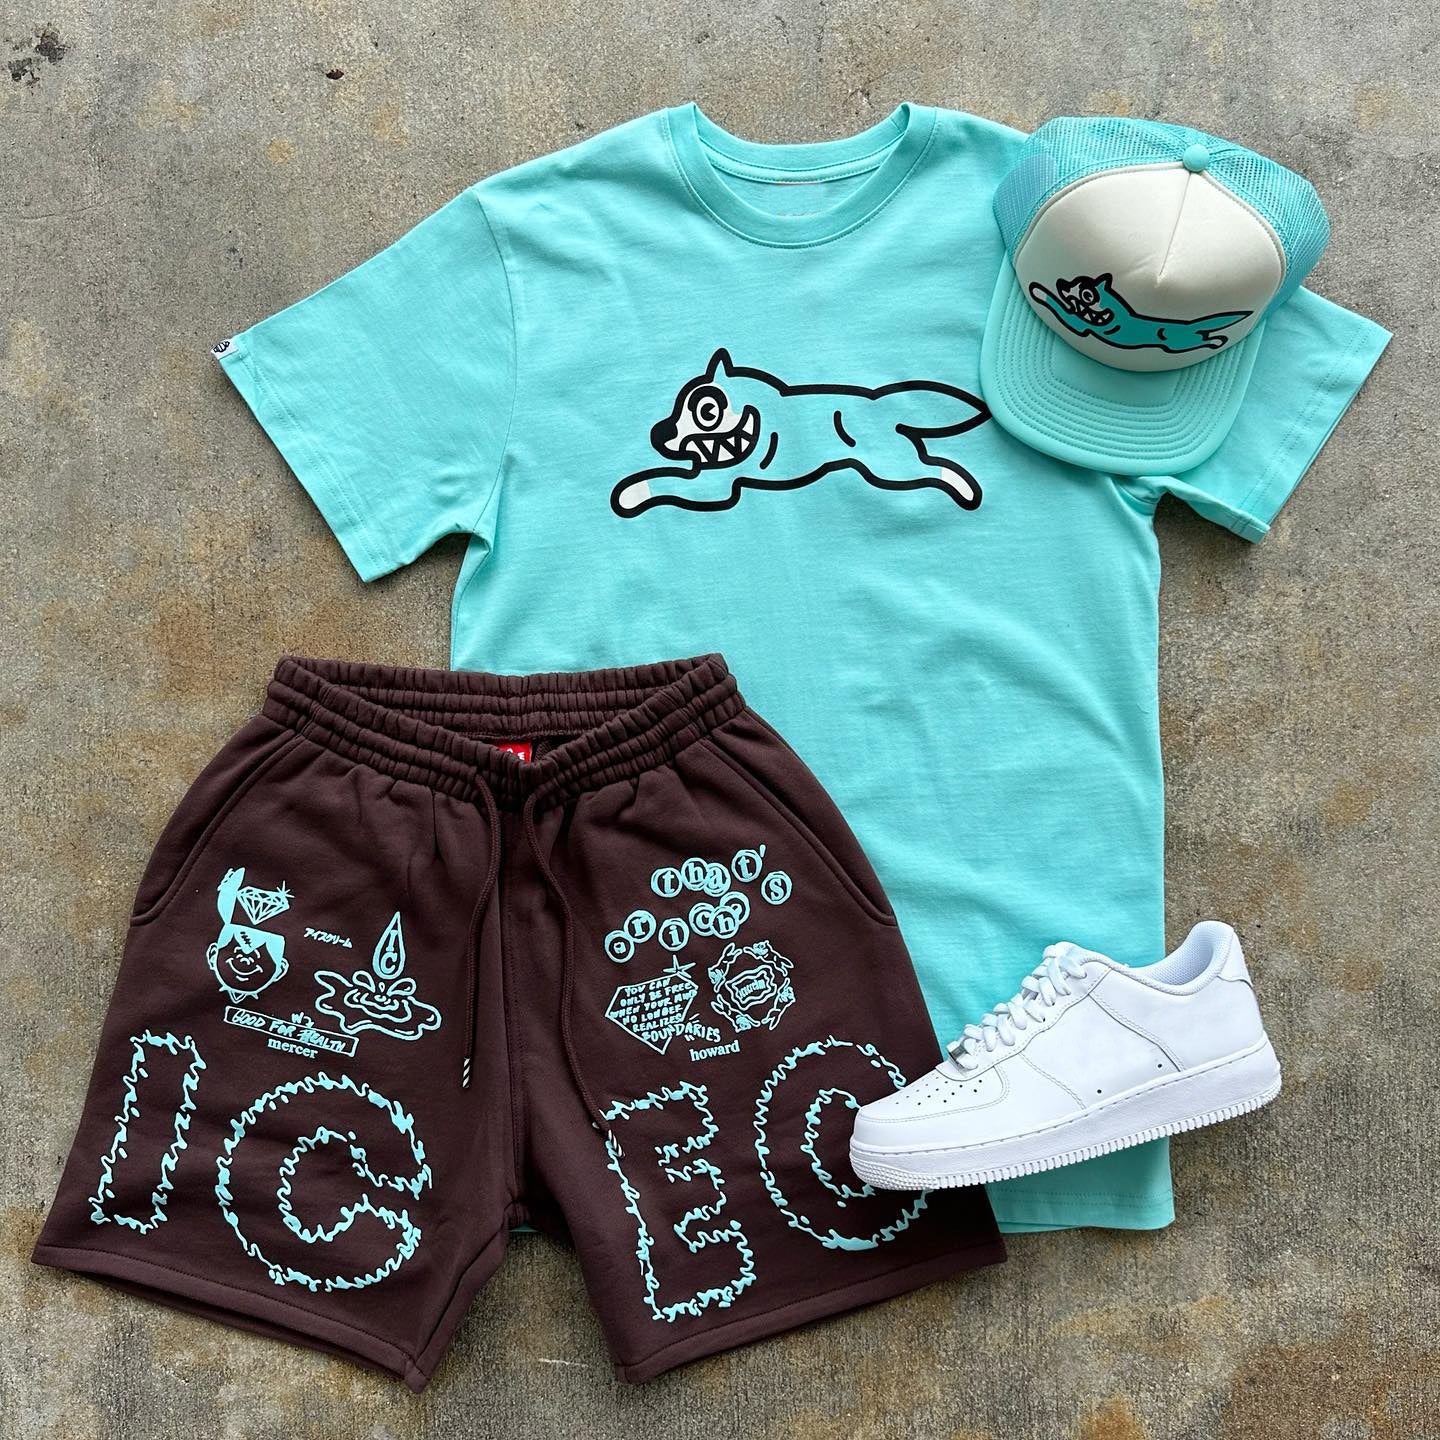 Fashionable preppy printed graphic T-shirt and shorts two-piece set